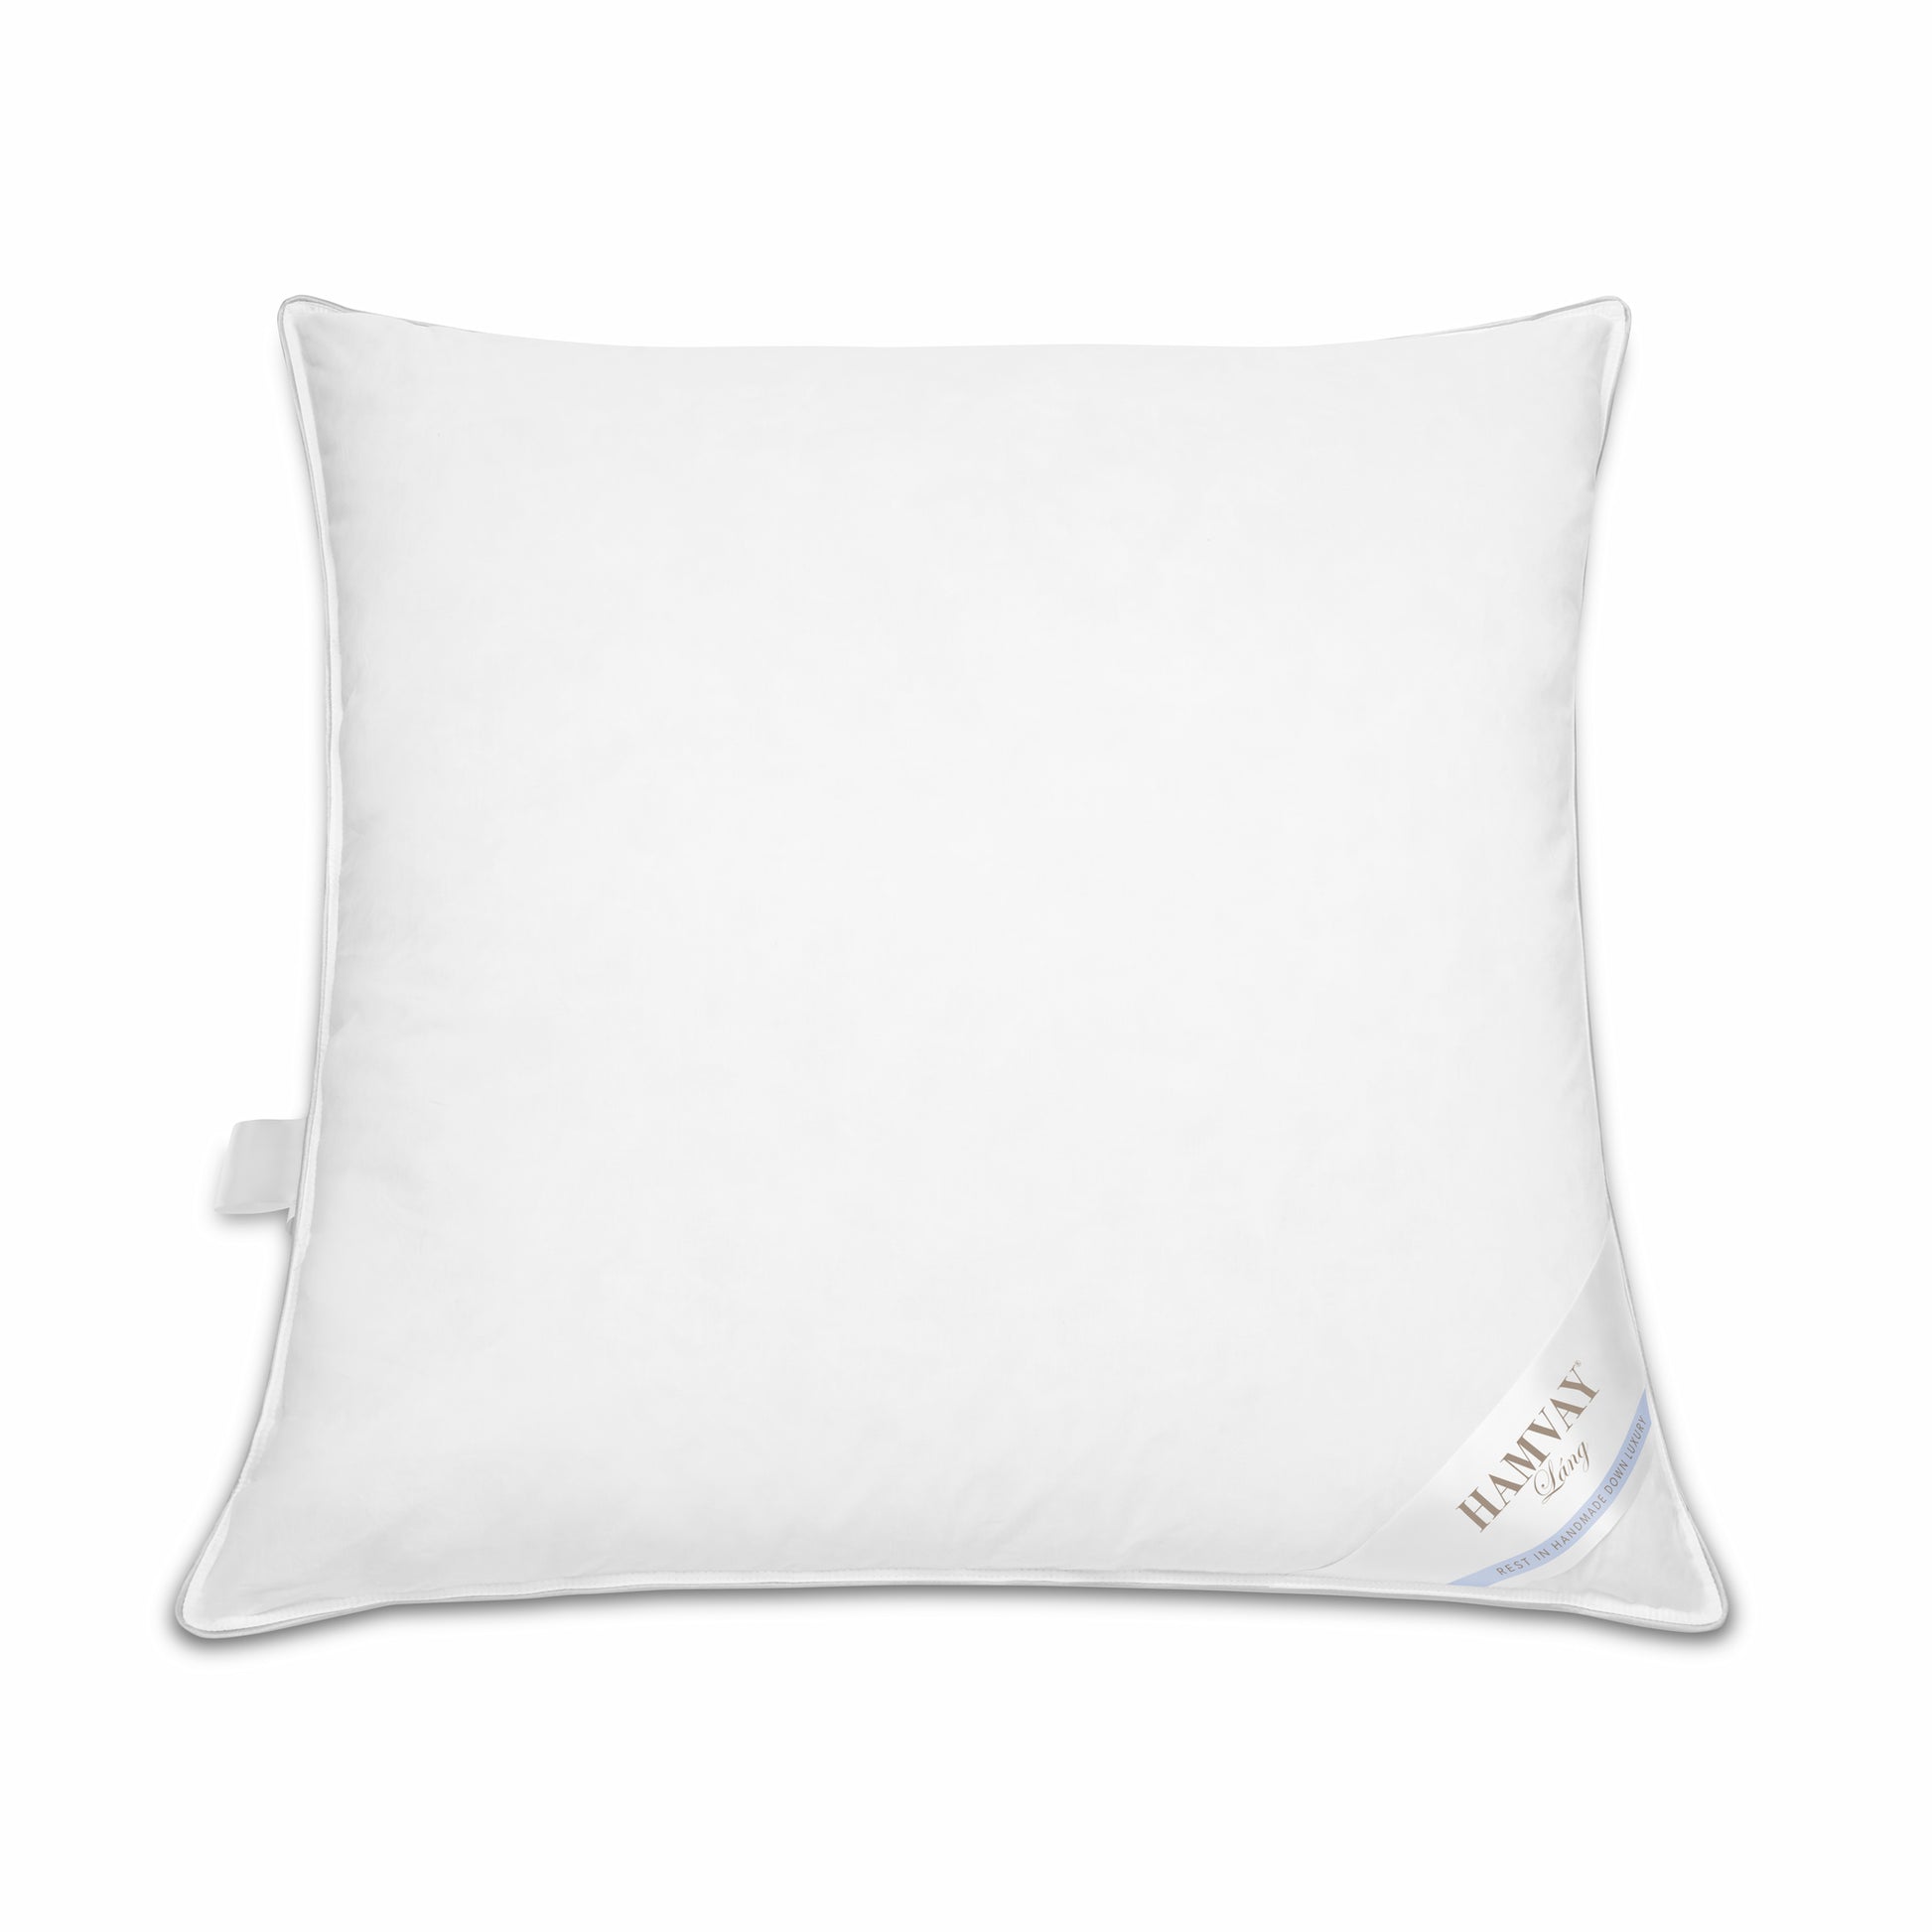 JA COMFORTS 18×18 Premium Goose Down Feather Throw Pillow Inserts(Set of  2)-5% Down Filling,High Filling Weight,250 TC Cotton Cover, Square, White